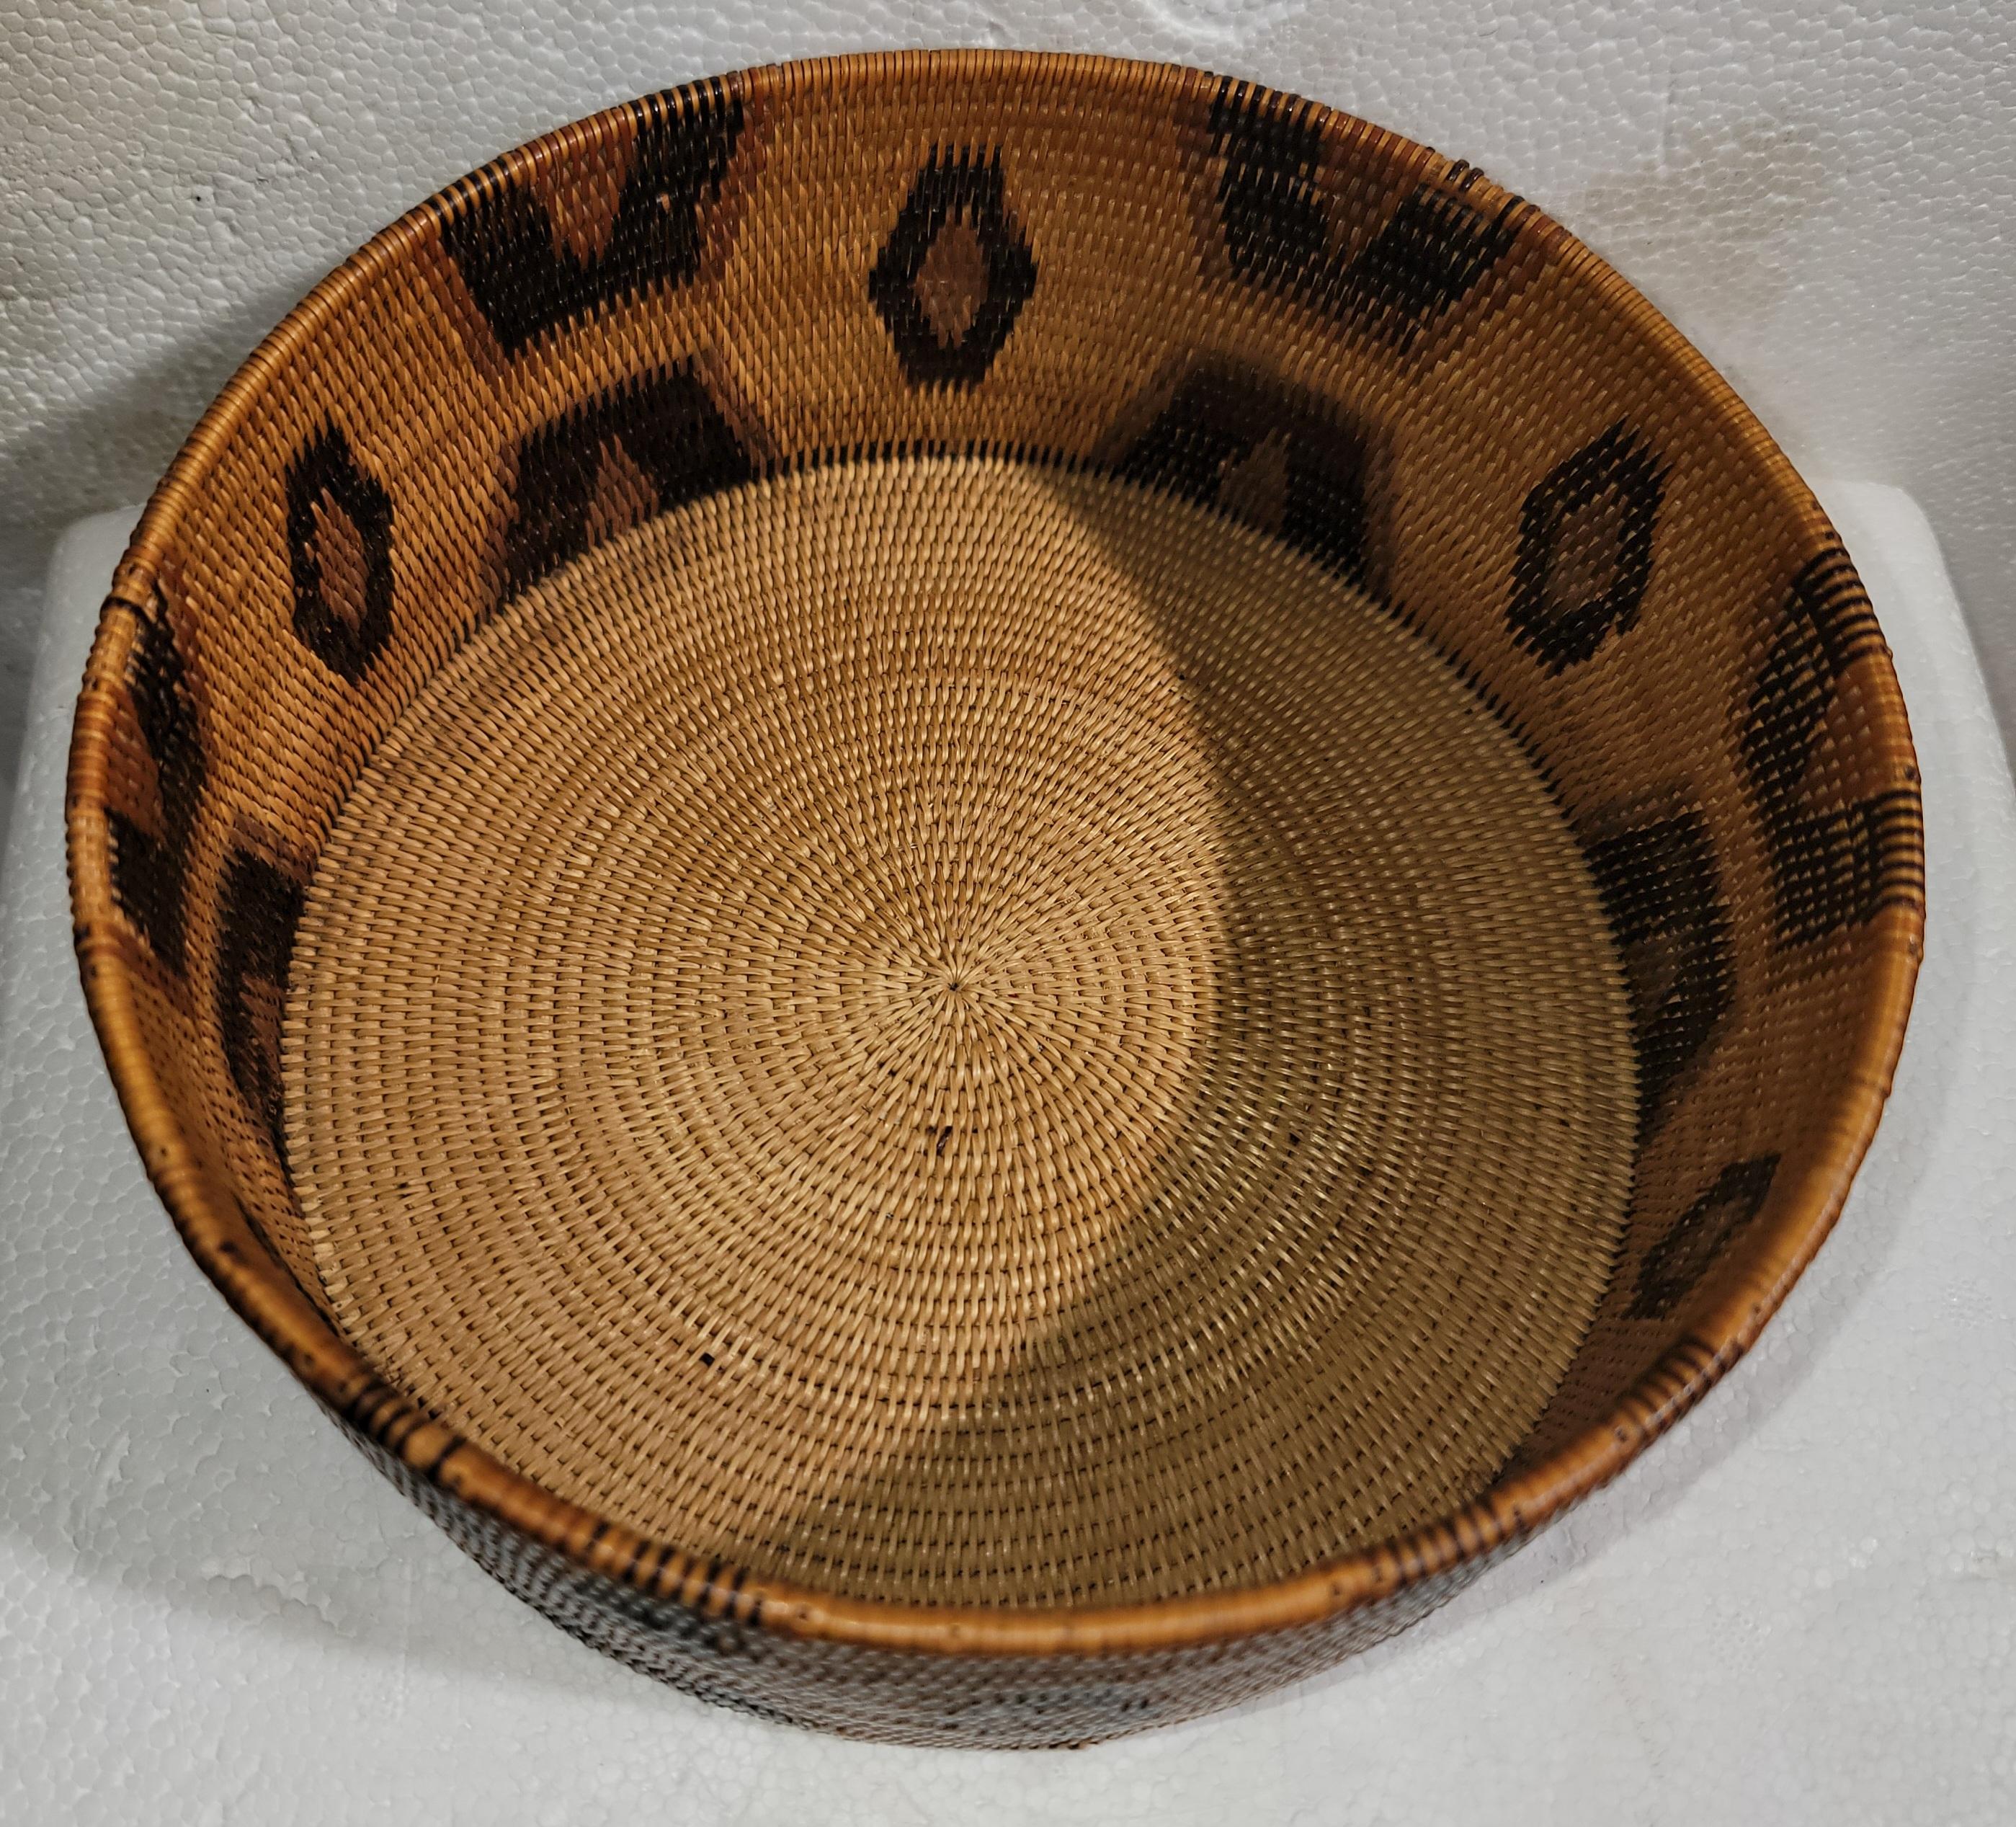 This fine 19thc lidded American Indian hand woven basket is in fine condition as found in a private Indian basket collection.